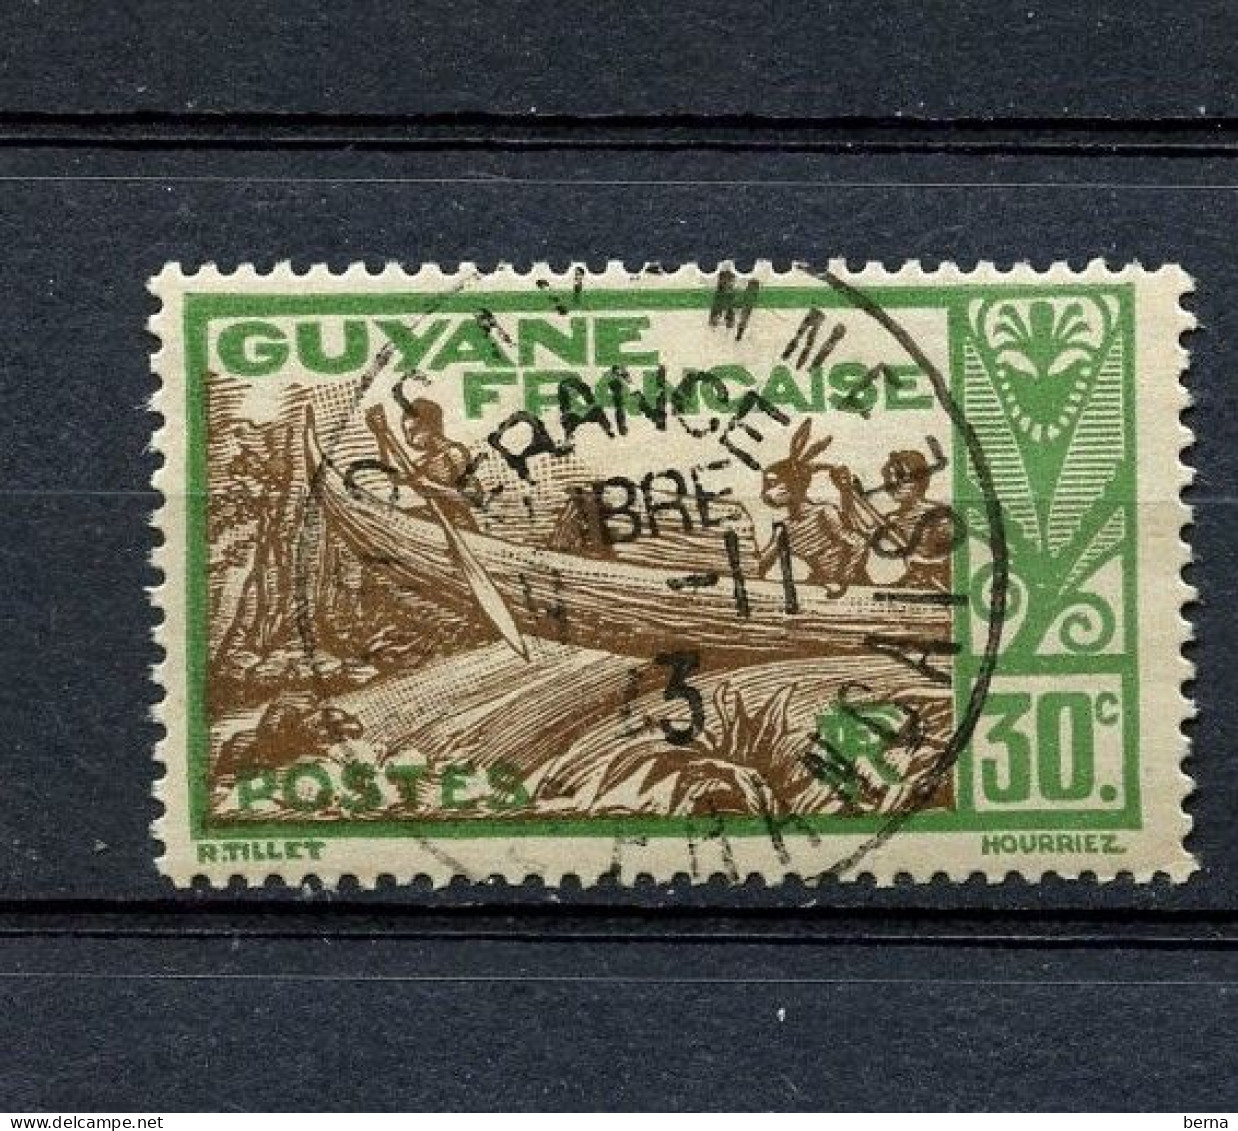 GUYANE 158 OBL CAYENNE FRANCE LIBRE - Used Stamps